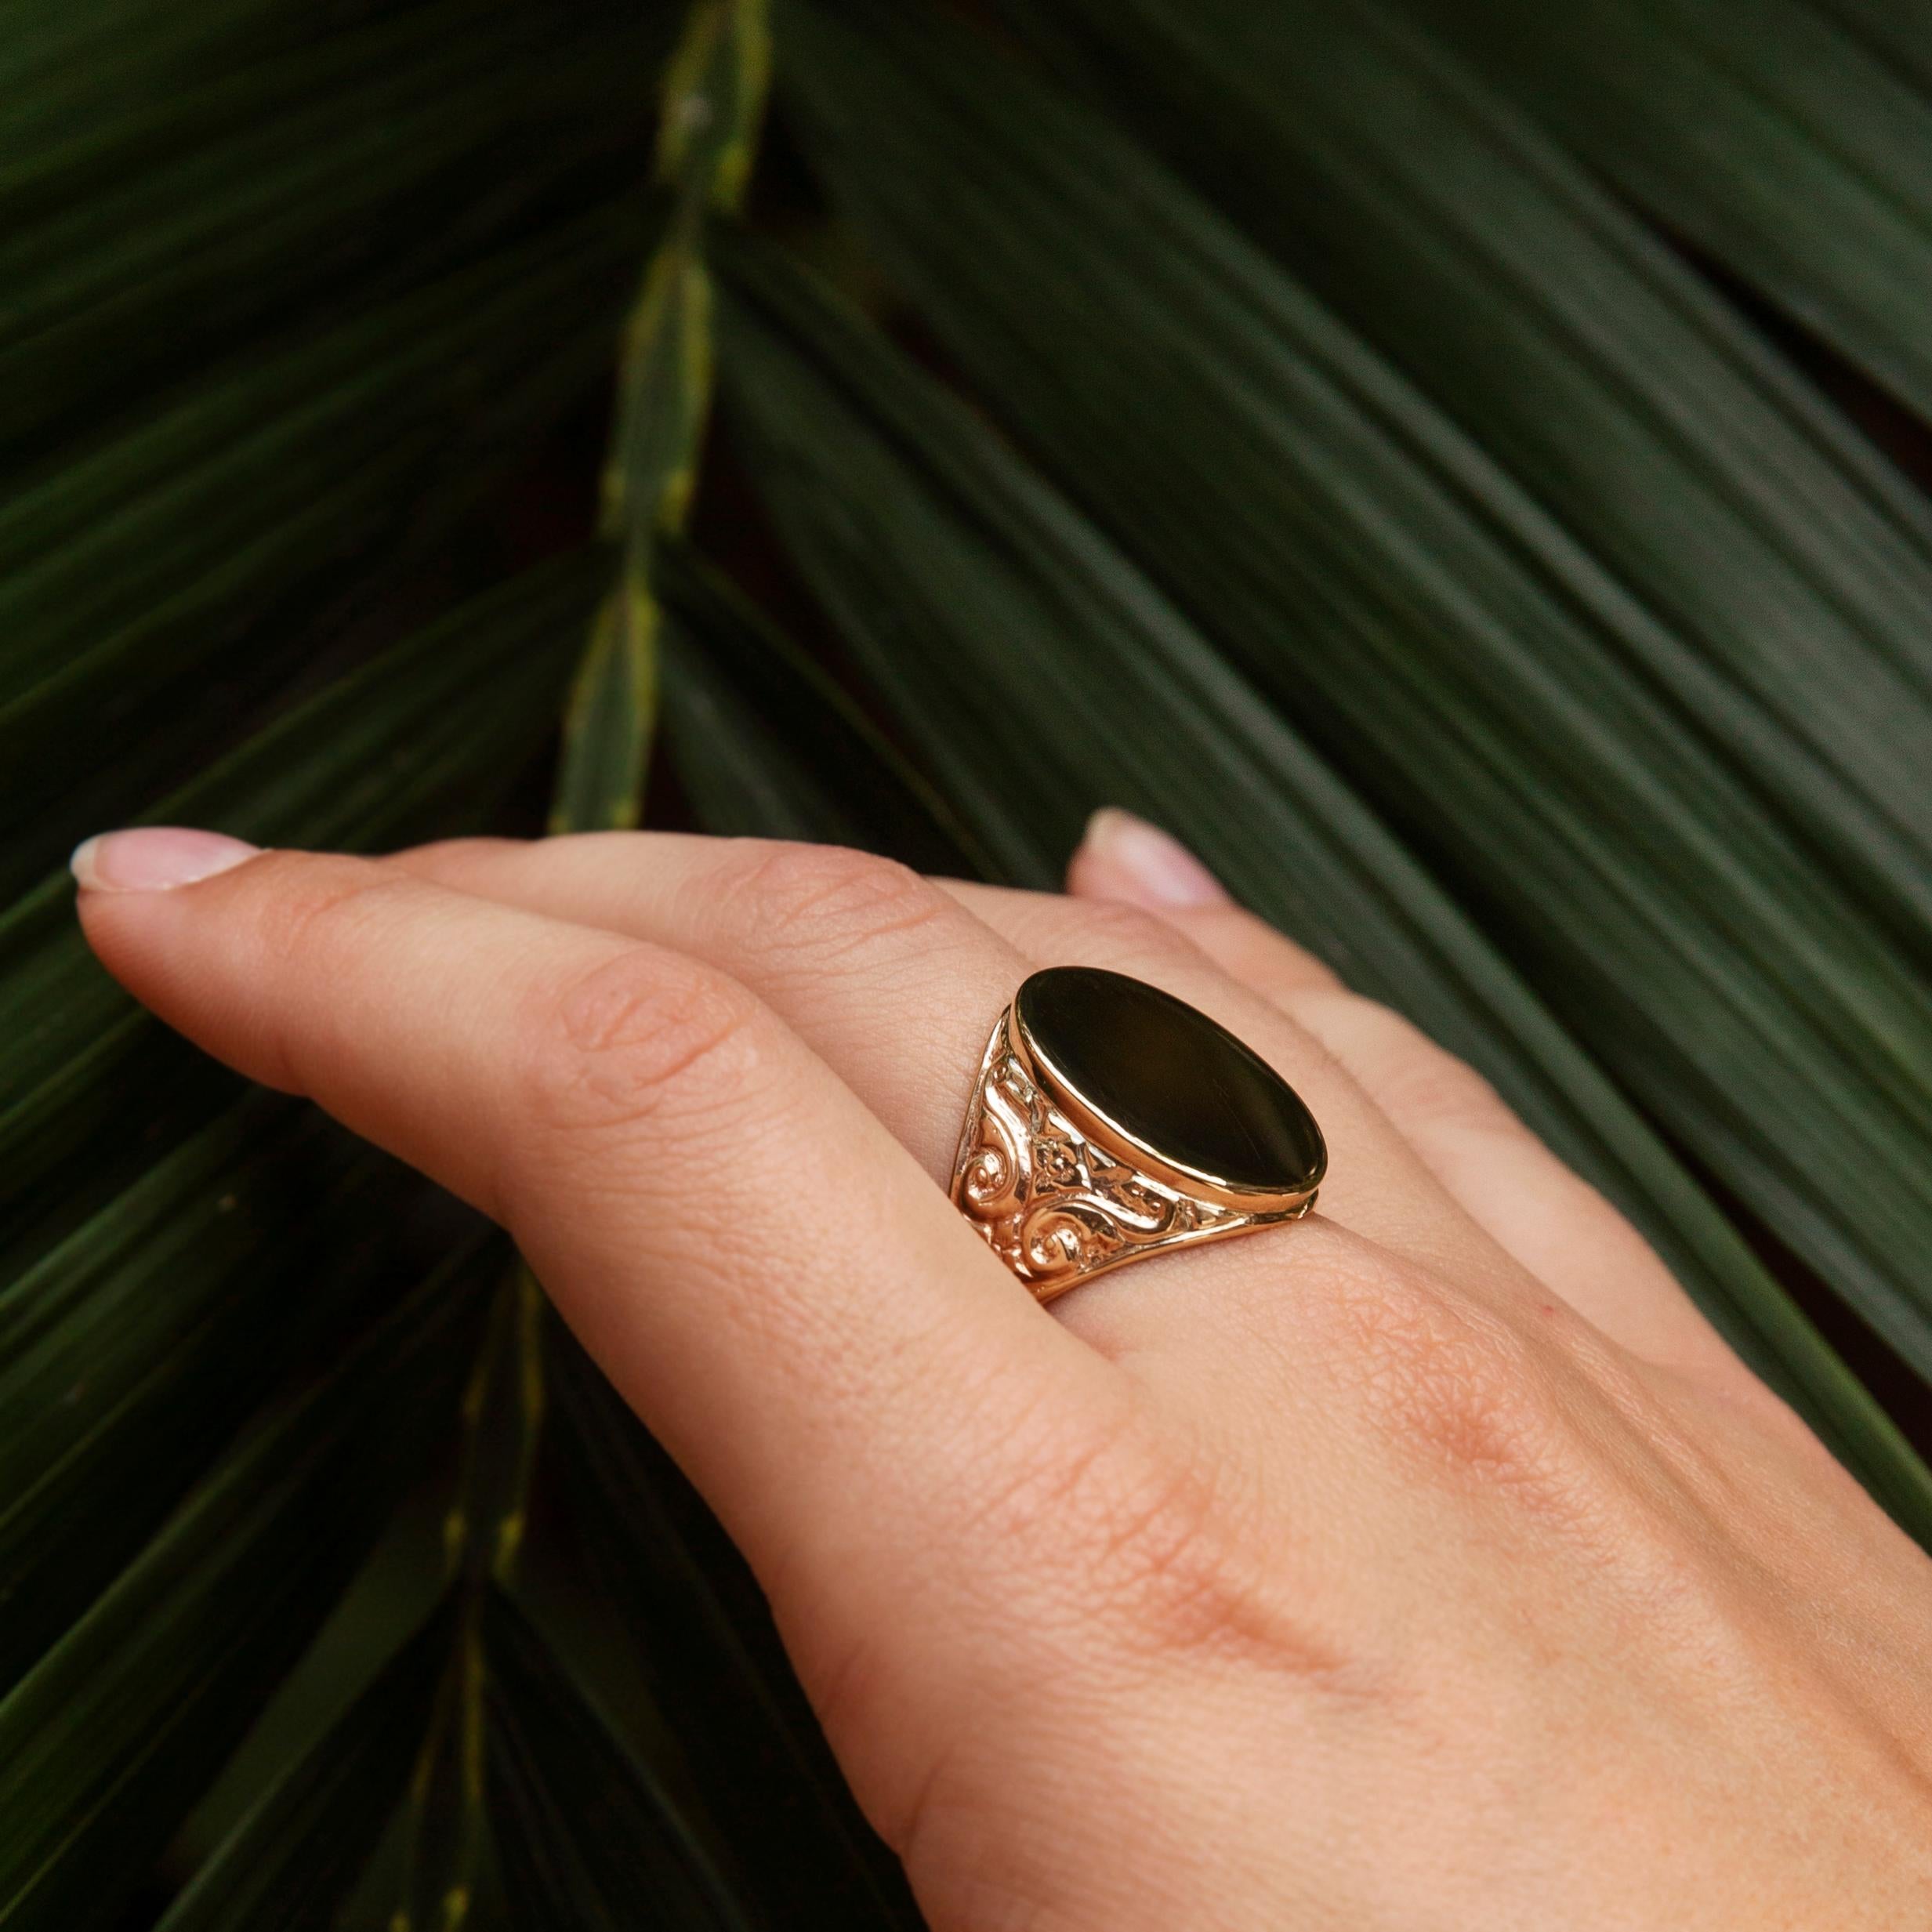 Forged in 9 carat gold, this wonderful vintage ring features elegant paisley patterned shoulders rising to a high polish oval top with space for a personal engraving. Her name is The Tennyson Ring. She is a lovely ring for adding that perfect